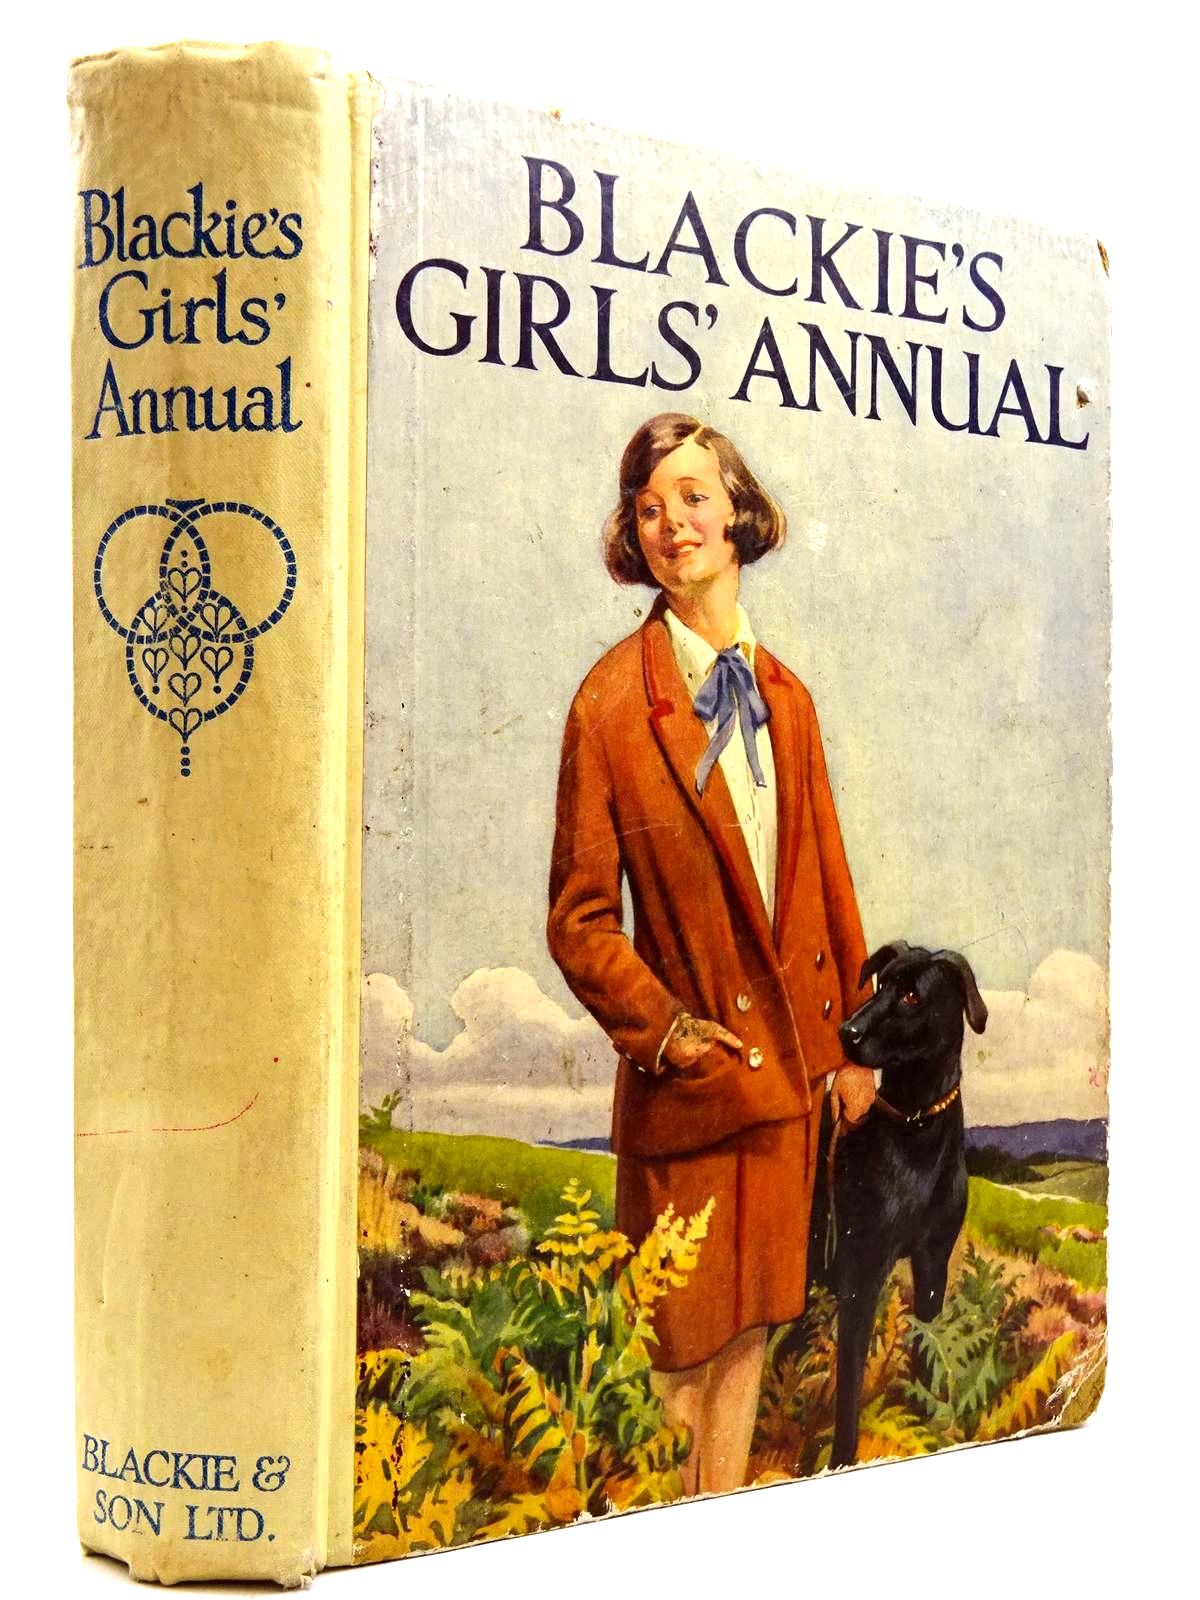 Photo of BLACKIE'S GIRLS' ANNUAL written by Peck, Winifred F.
Harrison, Florence
Rutley, C. Bernard
Brazil, Angela
et al,  illustrated by Brock, C.E.
Harrison, Florence
Cobb, Ruth
et al.,  published by Blackie & Son Ltd. (STOCK CODE: 2131358)  for sale by Stella & Rose's Books